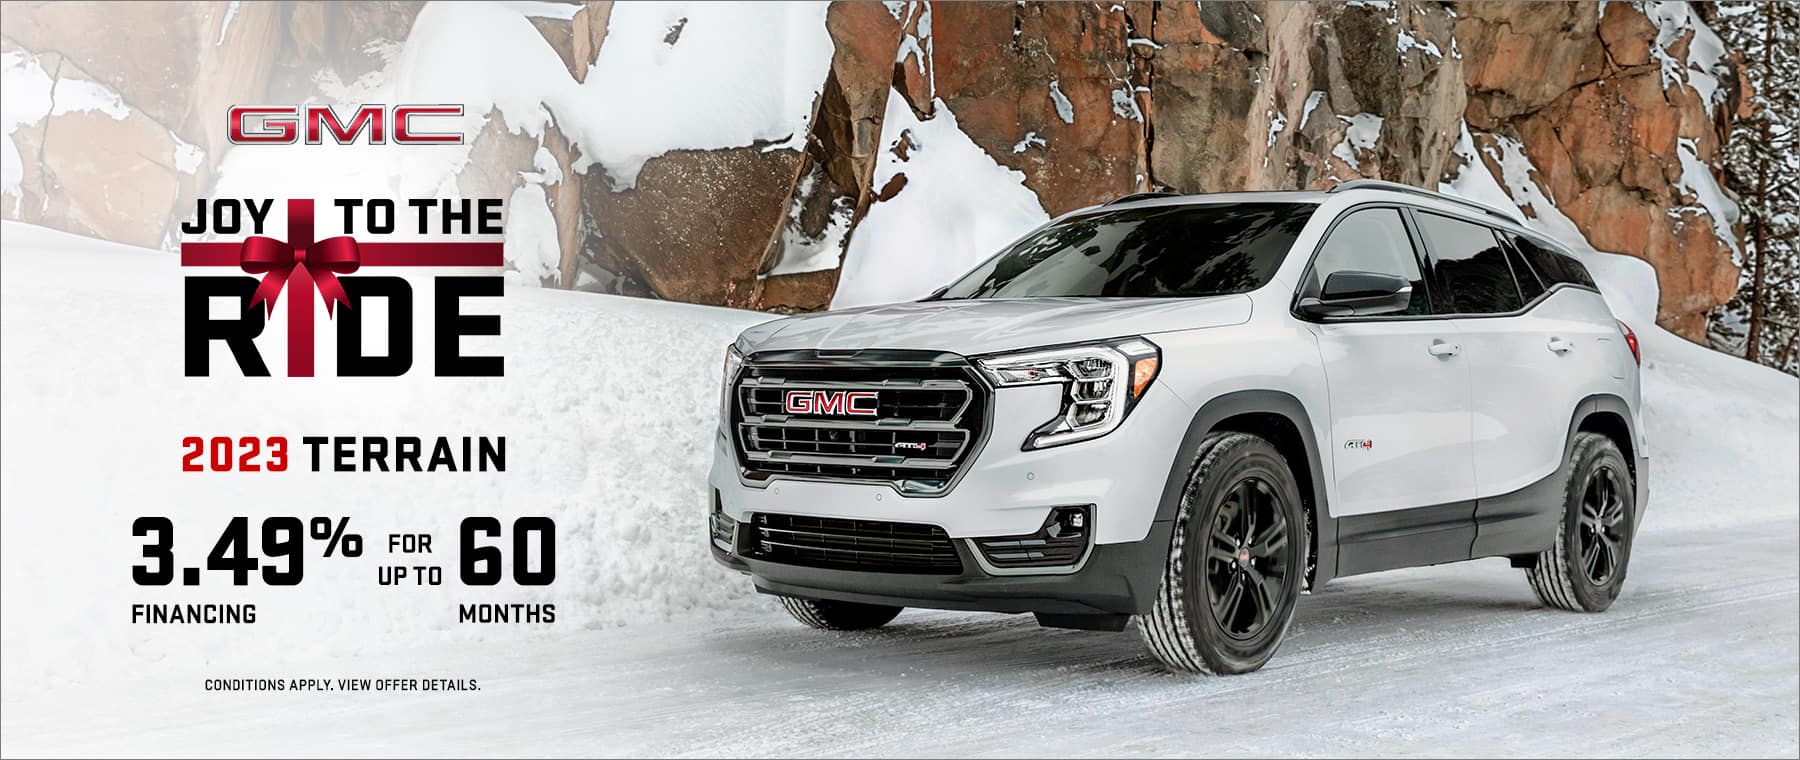 Get 3.49% financing for up to 60 months on a new 2023 GMC Terrain